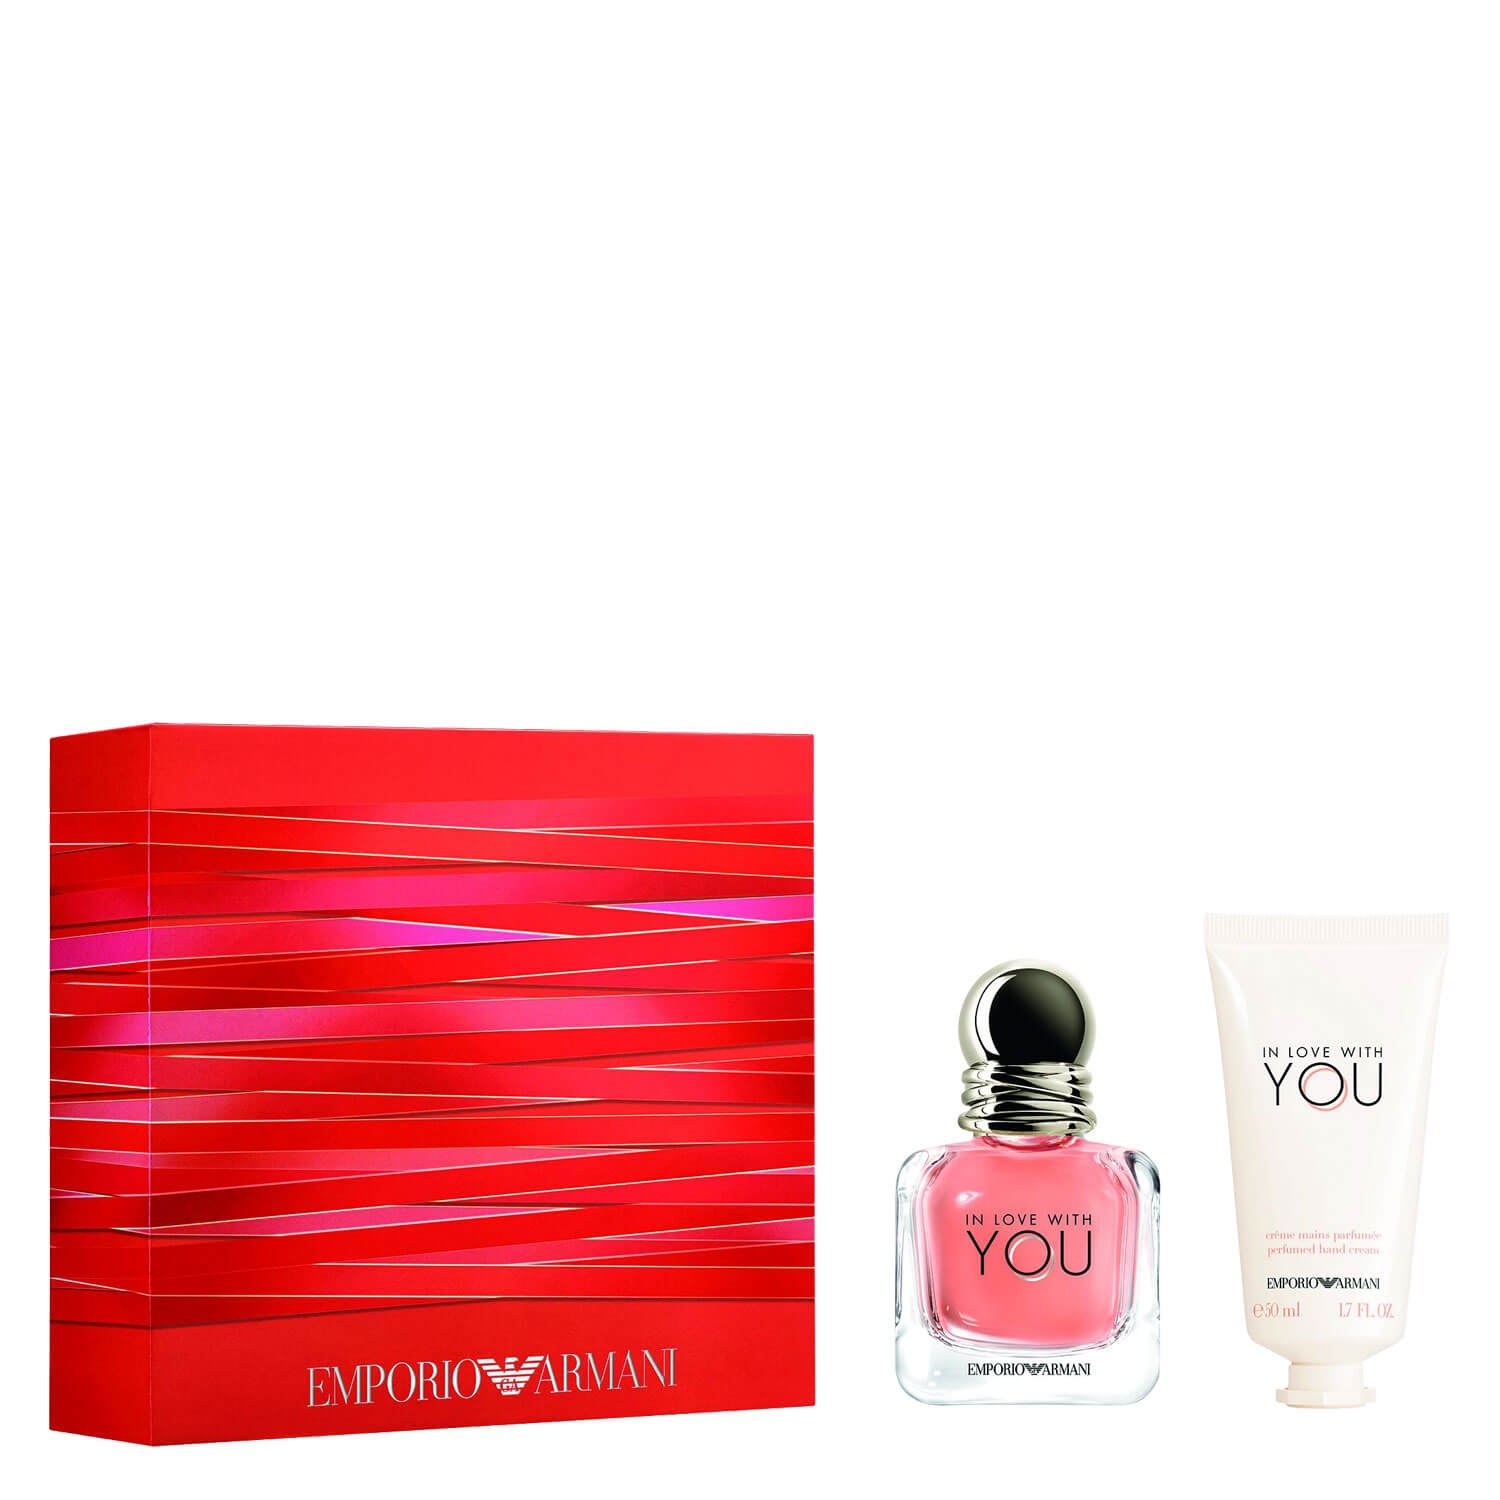 Product image from Emporio Armani - In Love With You Eau de Parfum Kit